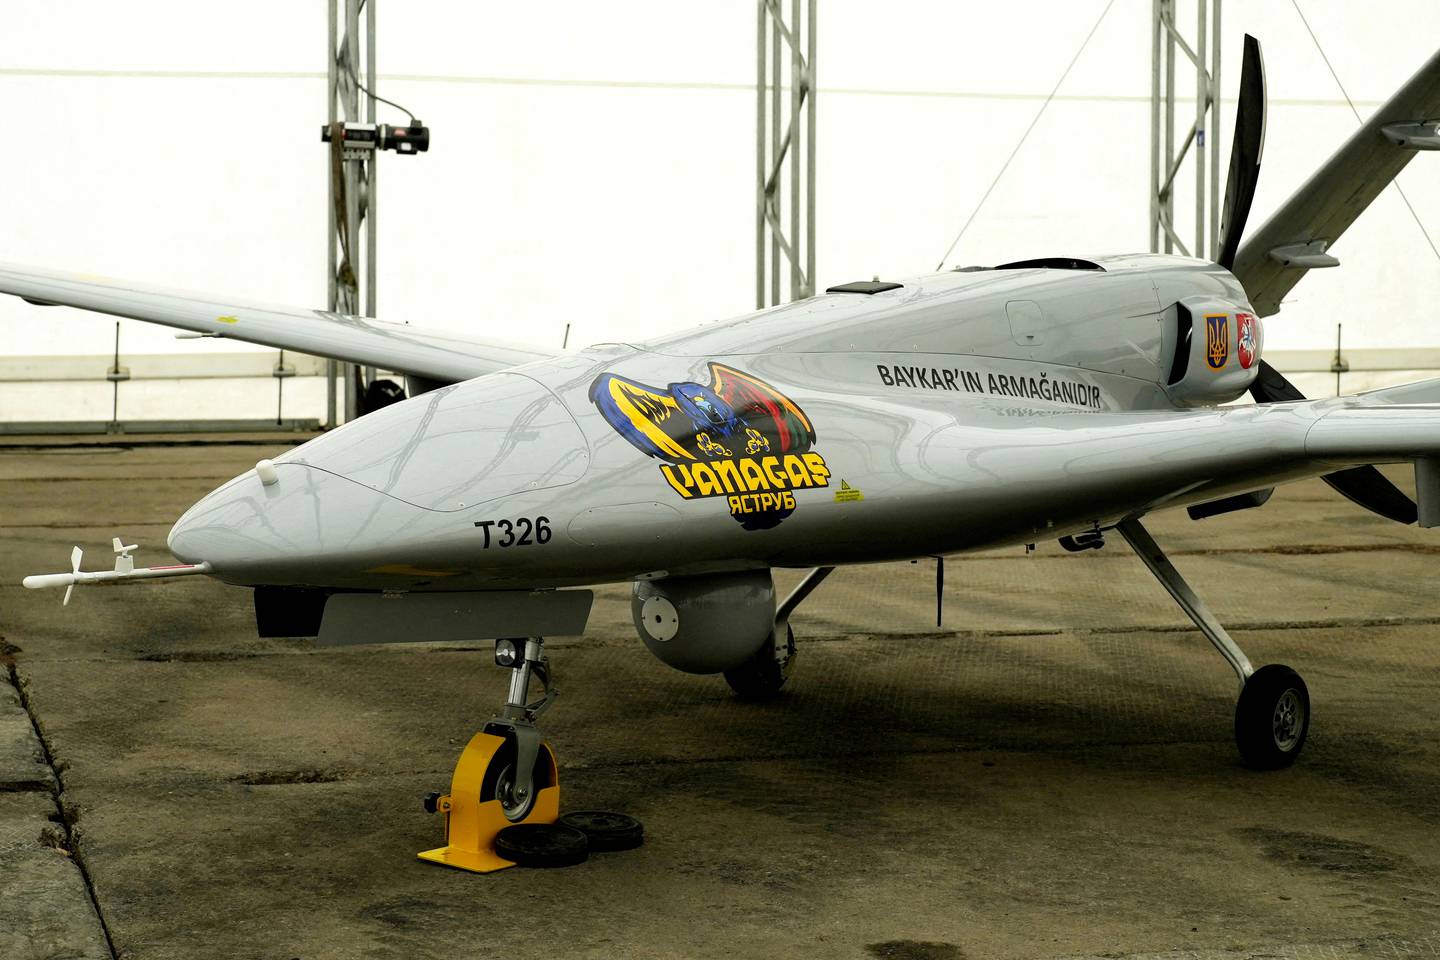 A Bayraktar TB2 combat drone donated to Ukraine is seen during presentation at the Siauliai Air Base, Lithuania. Reuters